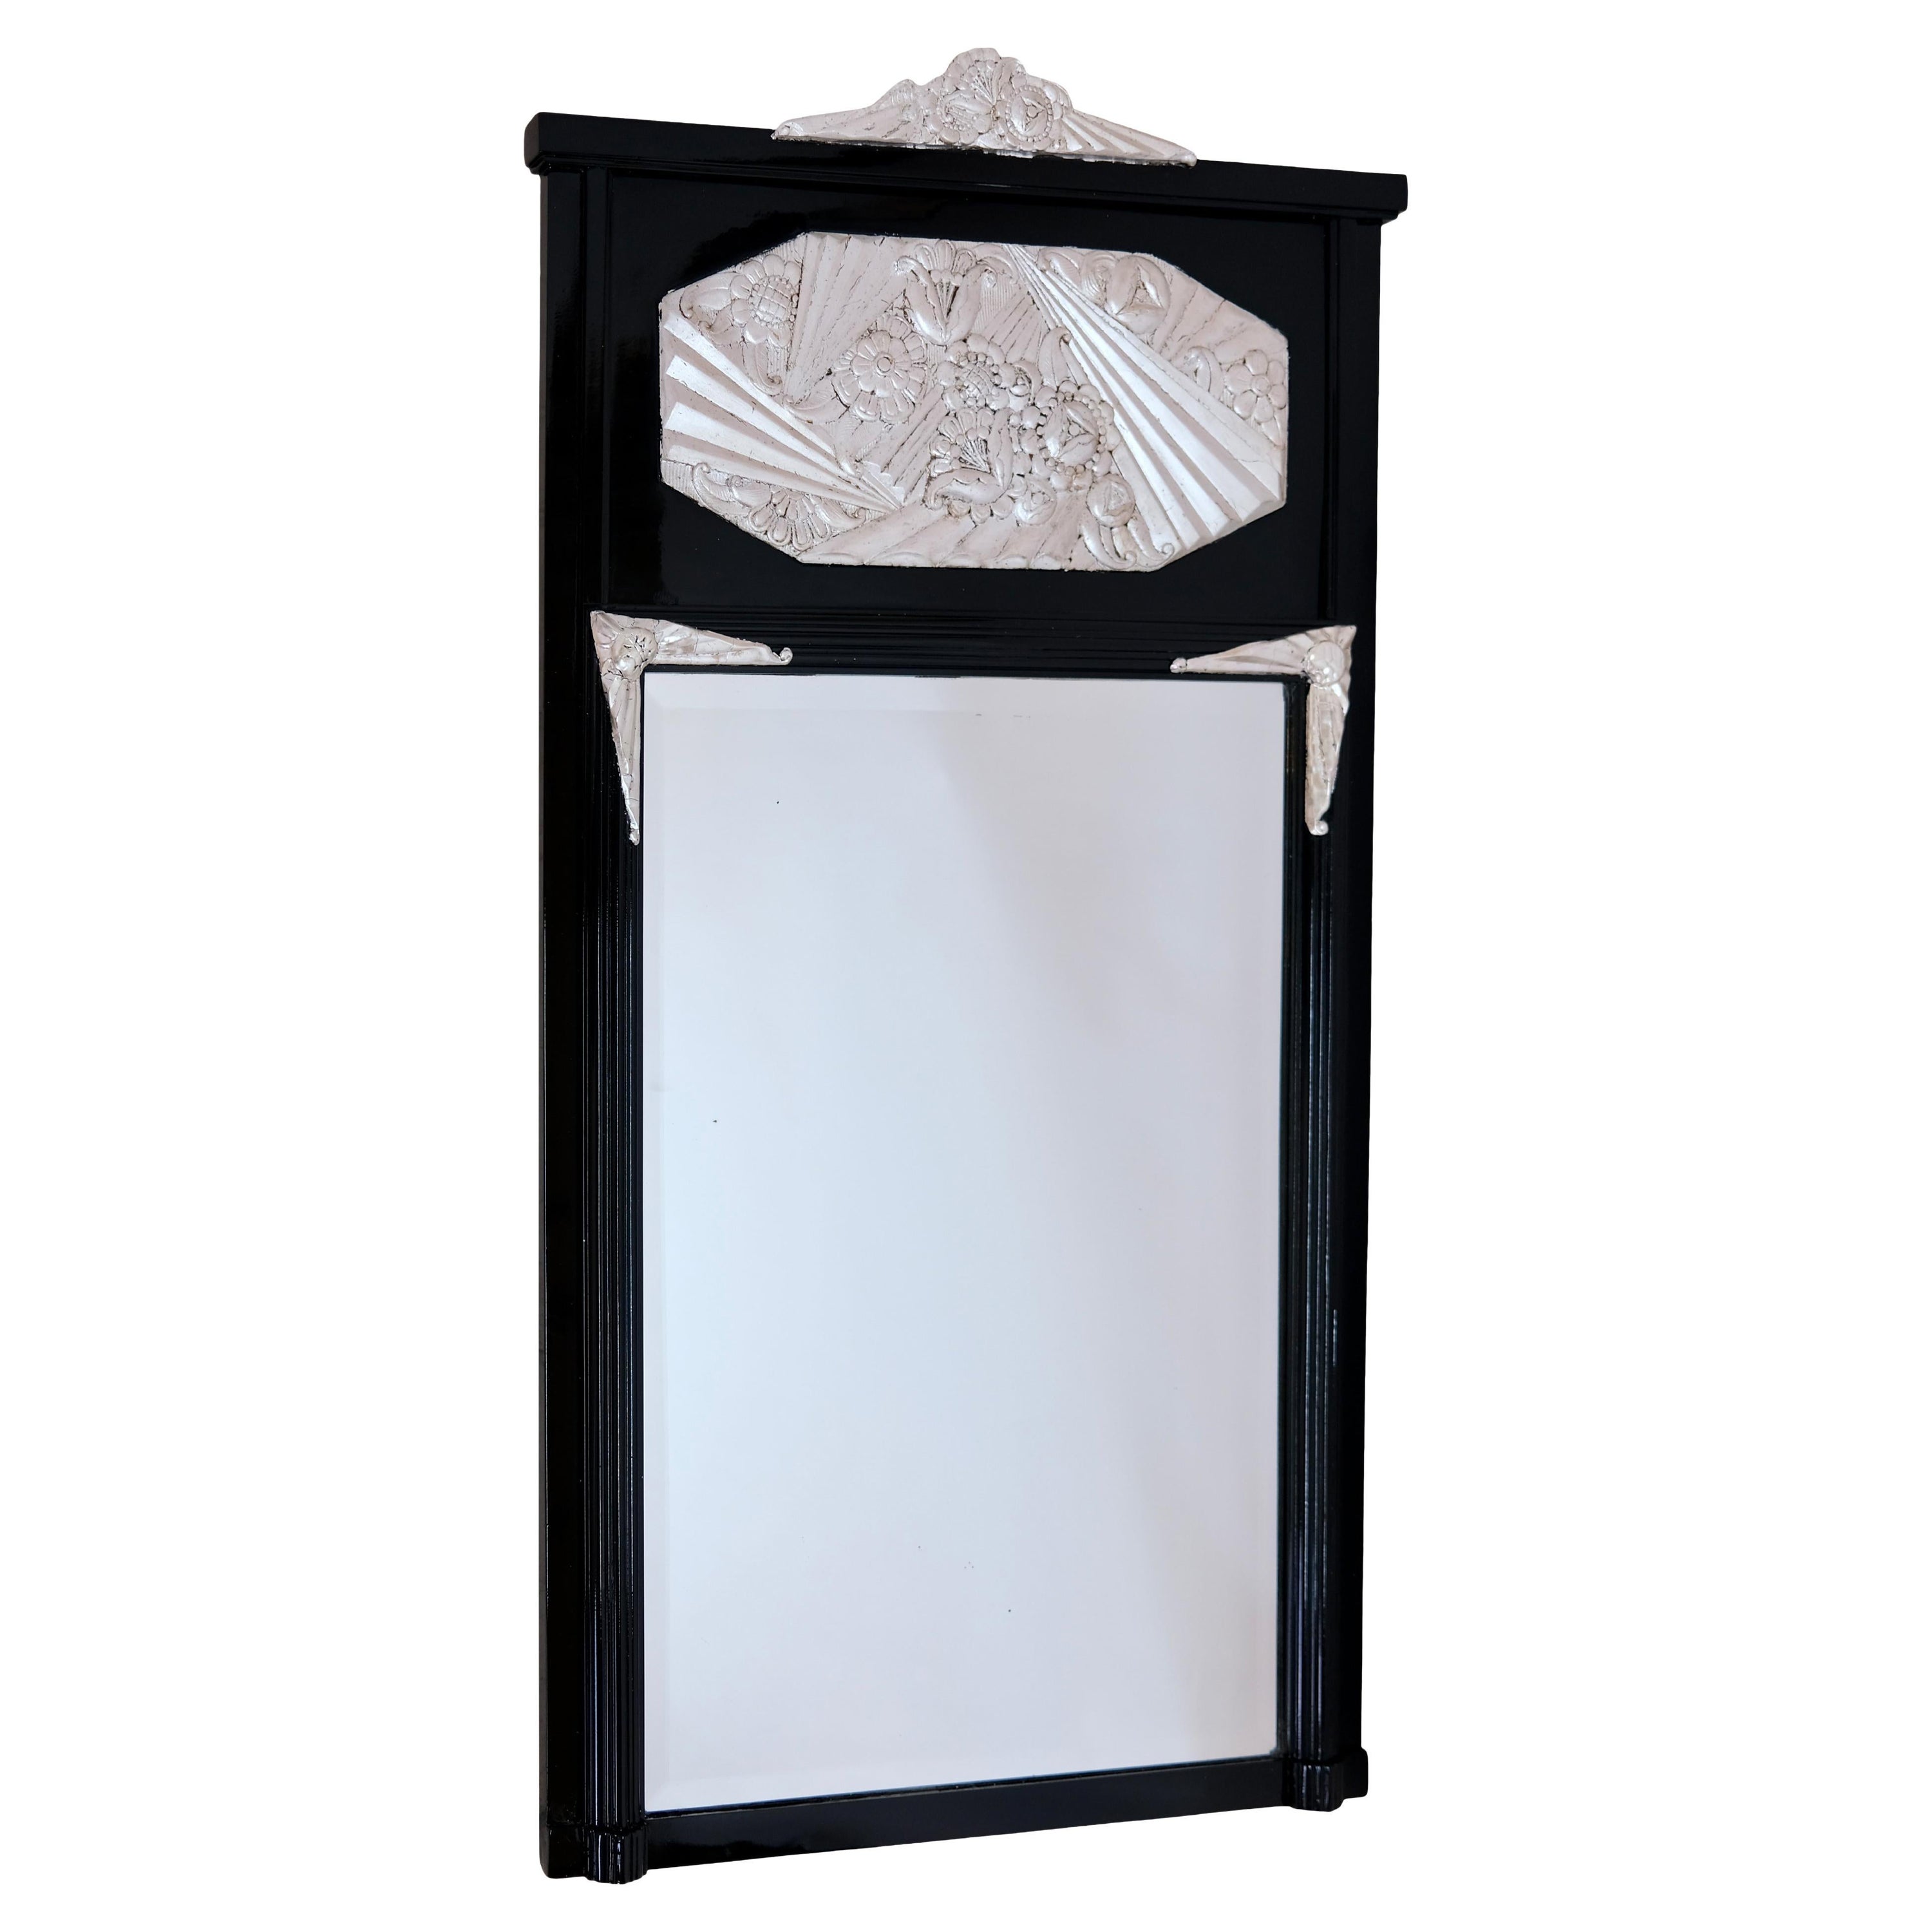 1930's Art Deco Wall Mirror in Black Lacquer with Silvered Art Deco Pattern